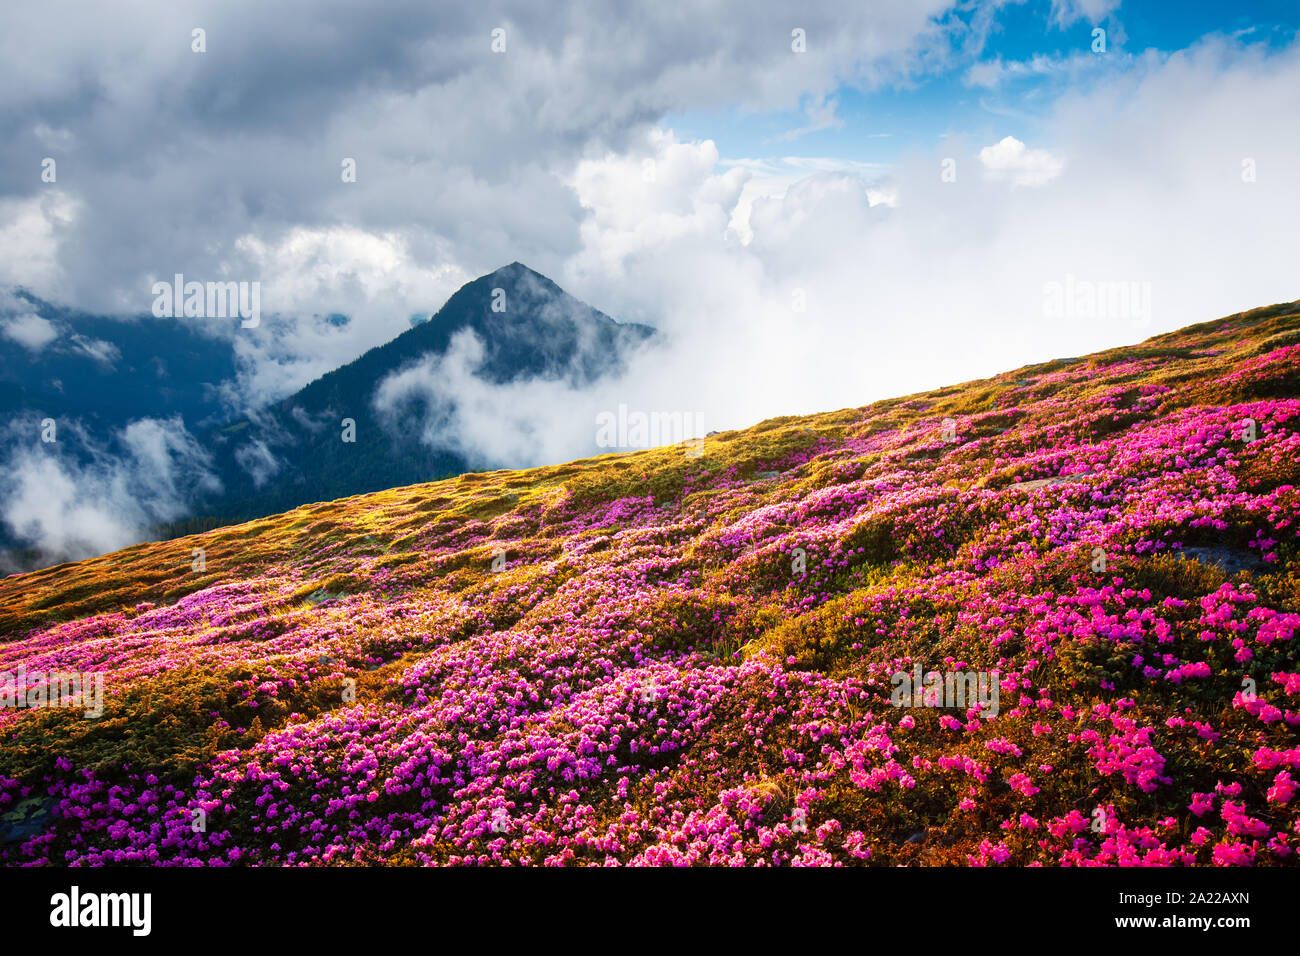 Magical Landscape With Charming Pink Rhododendron Flowers At